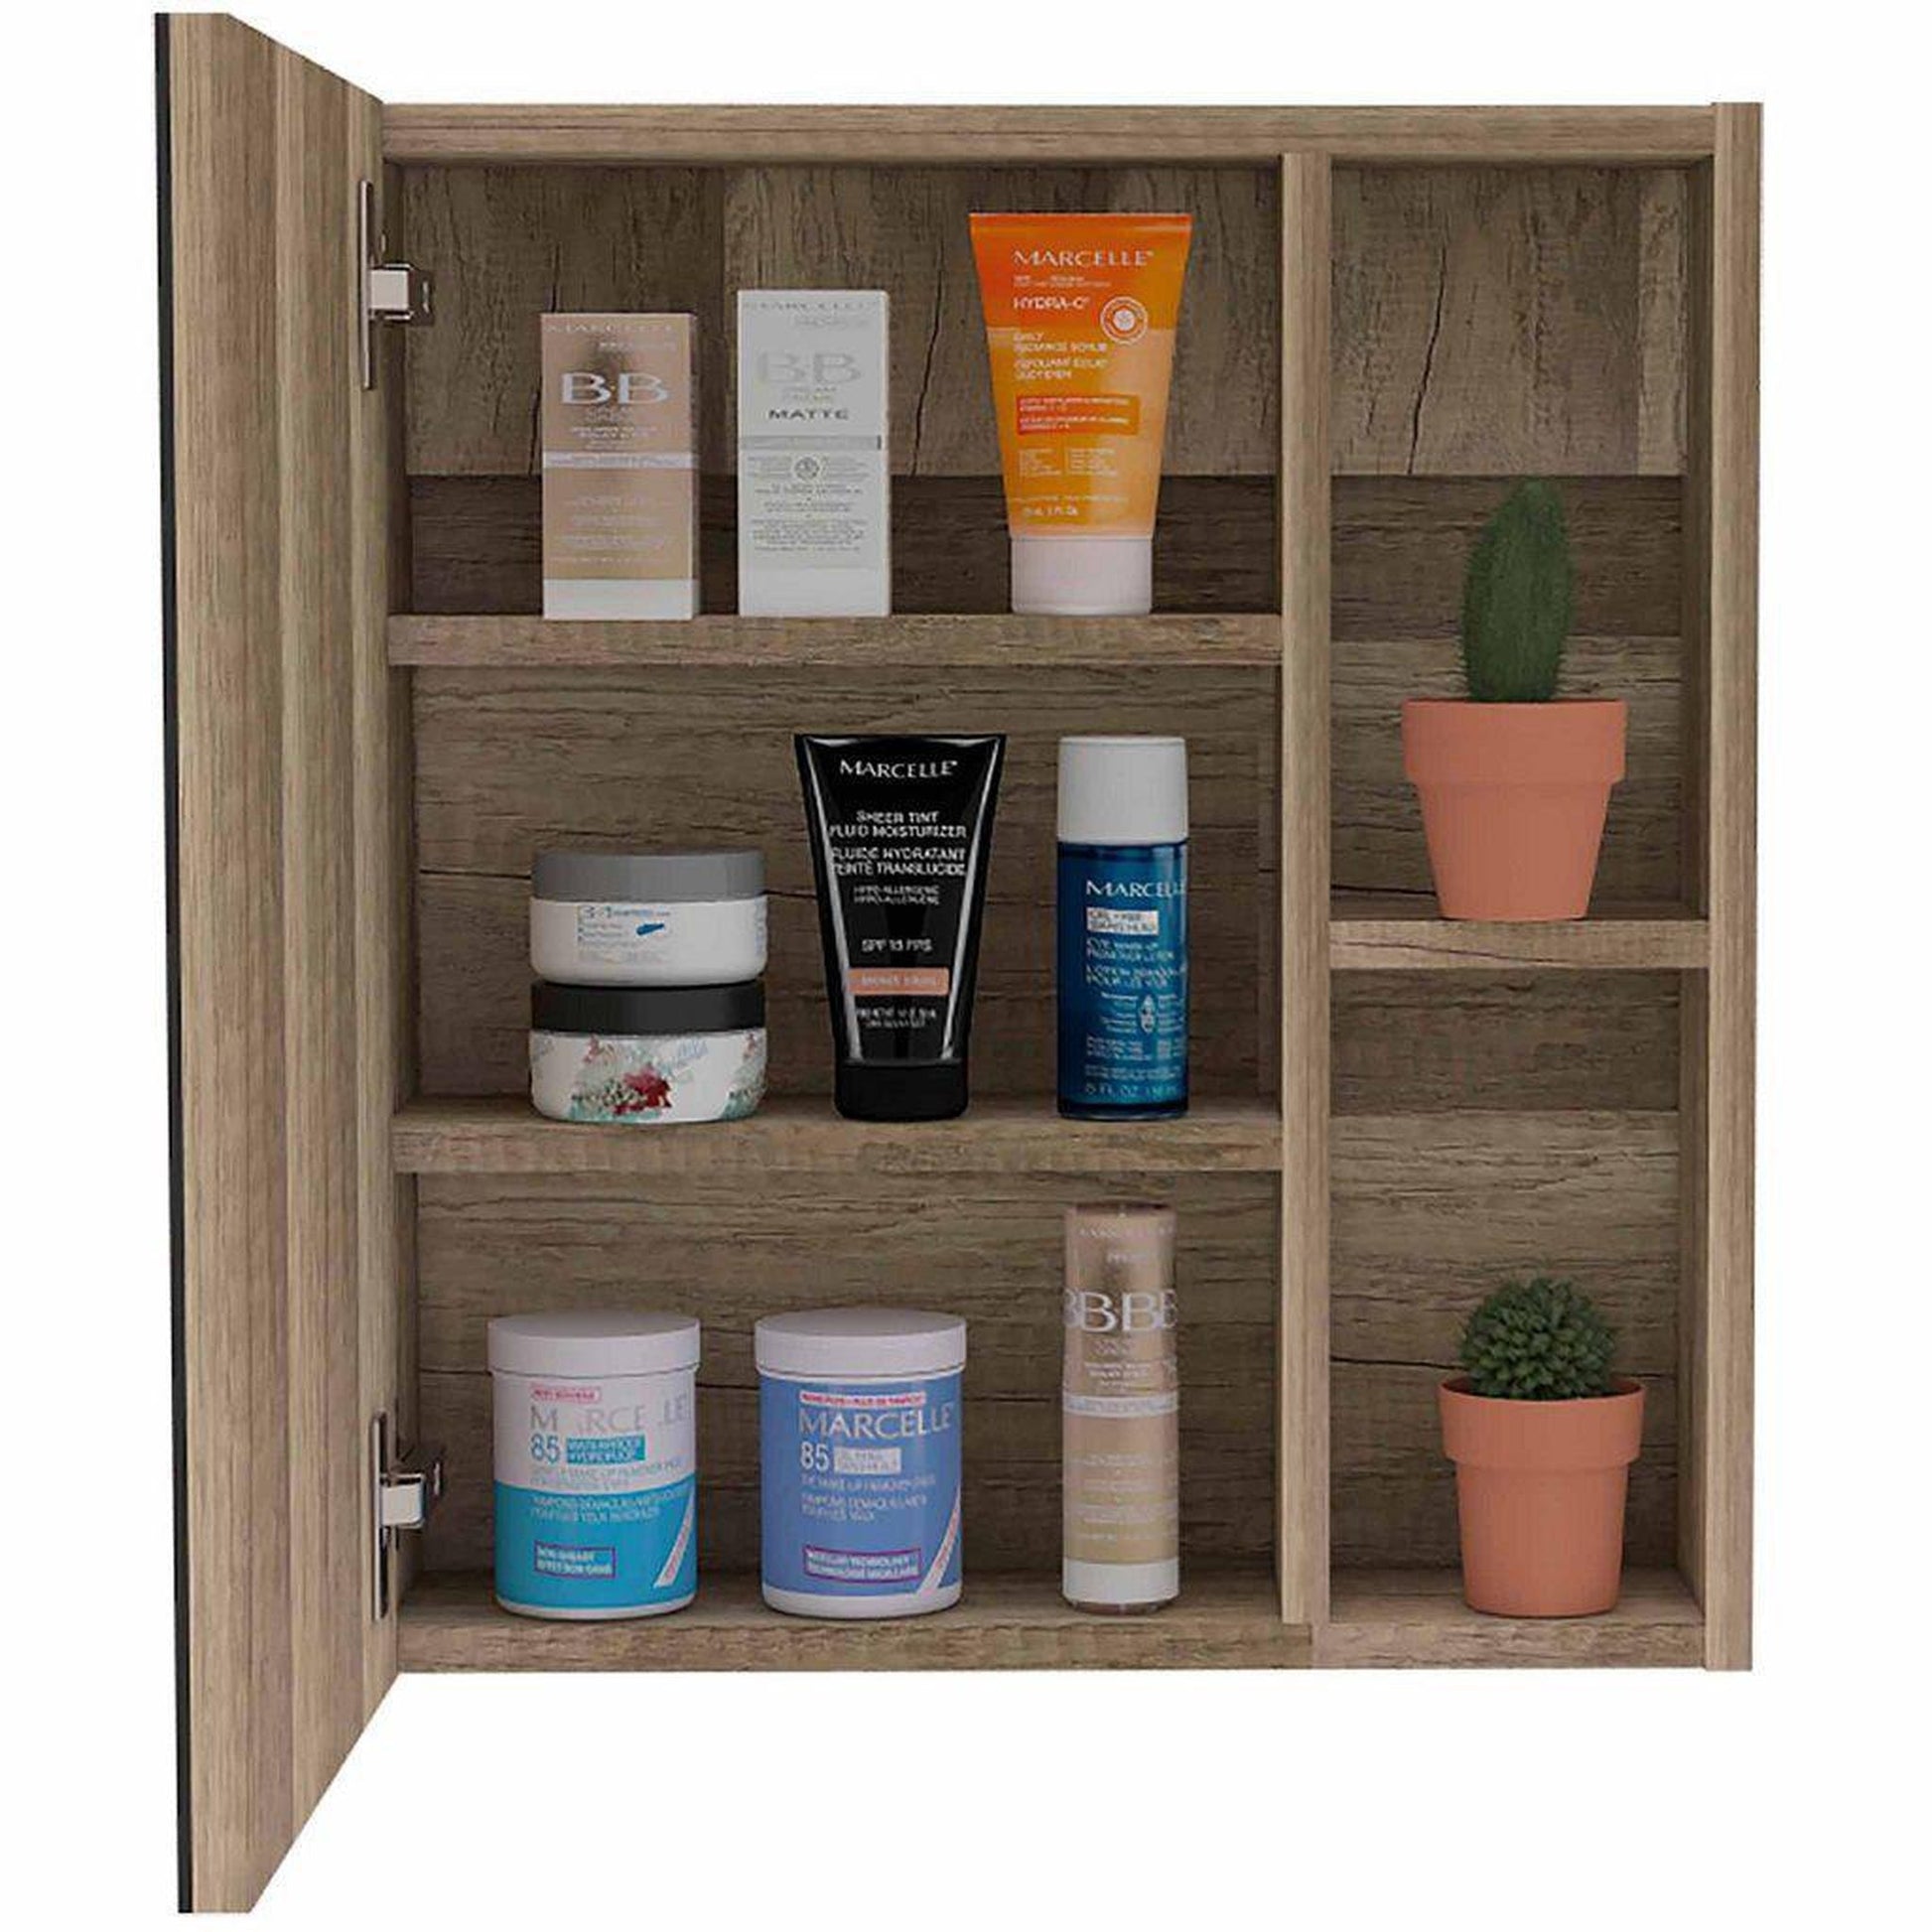 TUHOME Labelle 18" x 20" Weathered Oak Wall-Mounted Mirror Medicine Cabinet With 2 Open Shelves